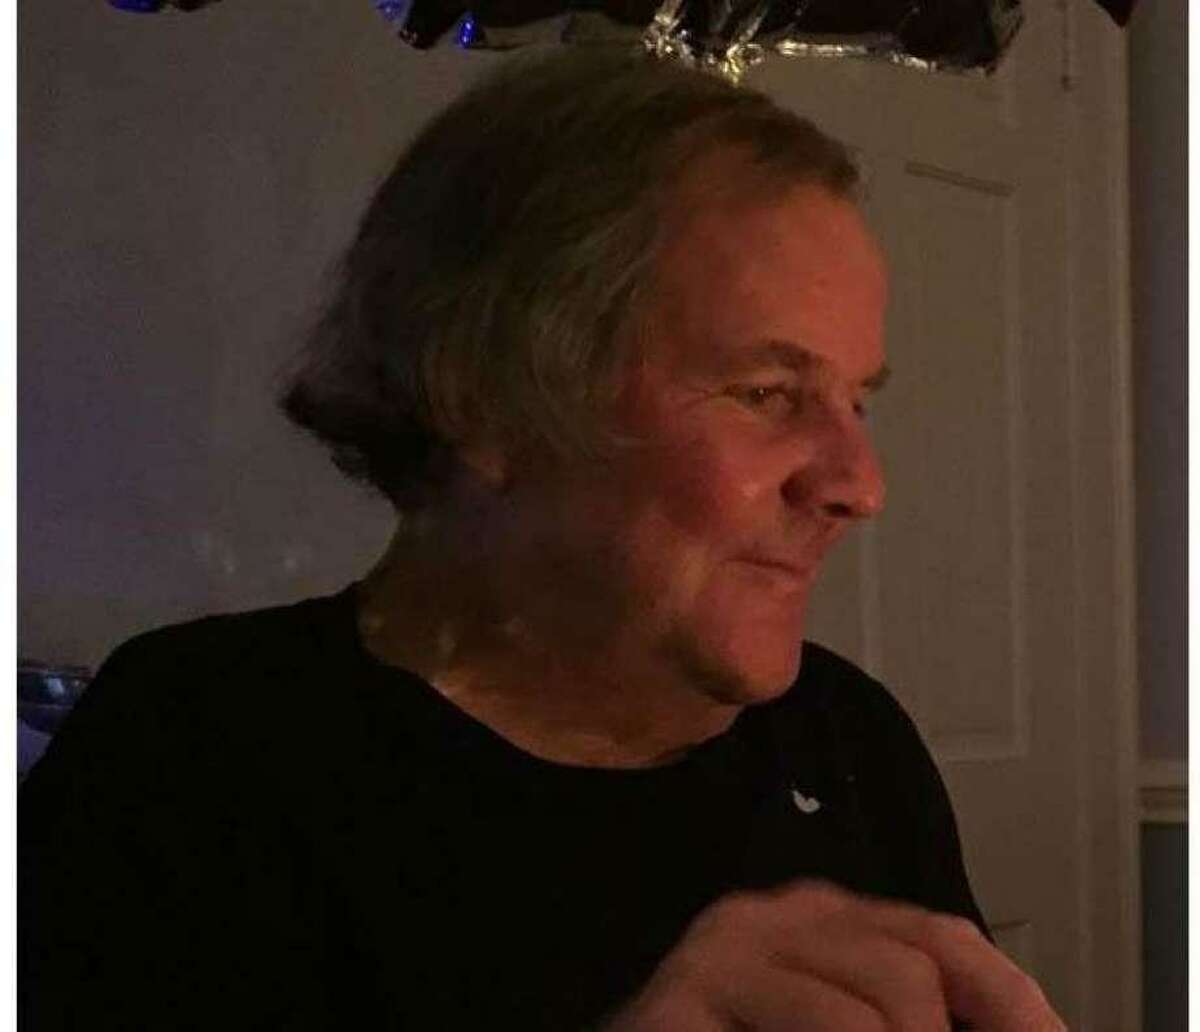 Police are investigating the “untimely death” of Kenneth Wood-Cahusac after the 61-year-old man’s body was found Thursday, March 16, 2017 near the Mianus River.